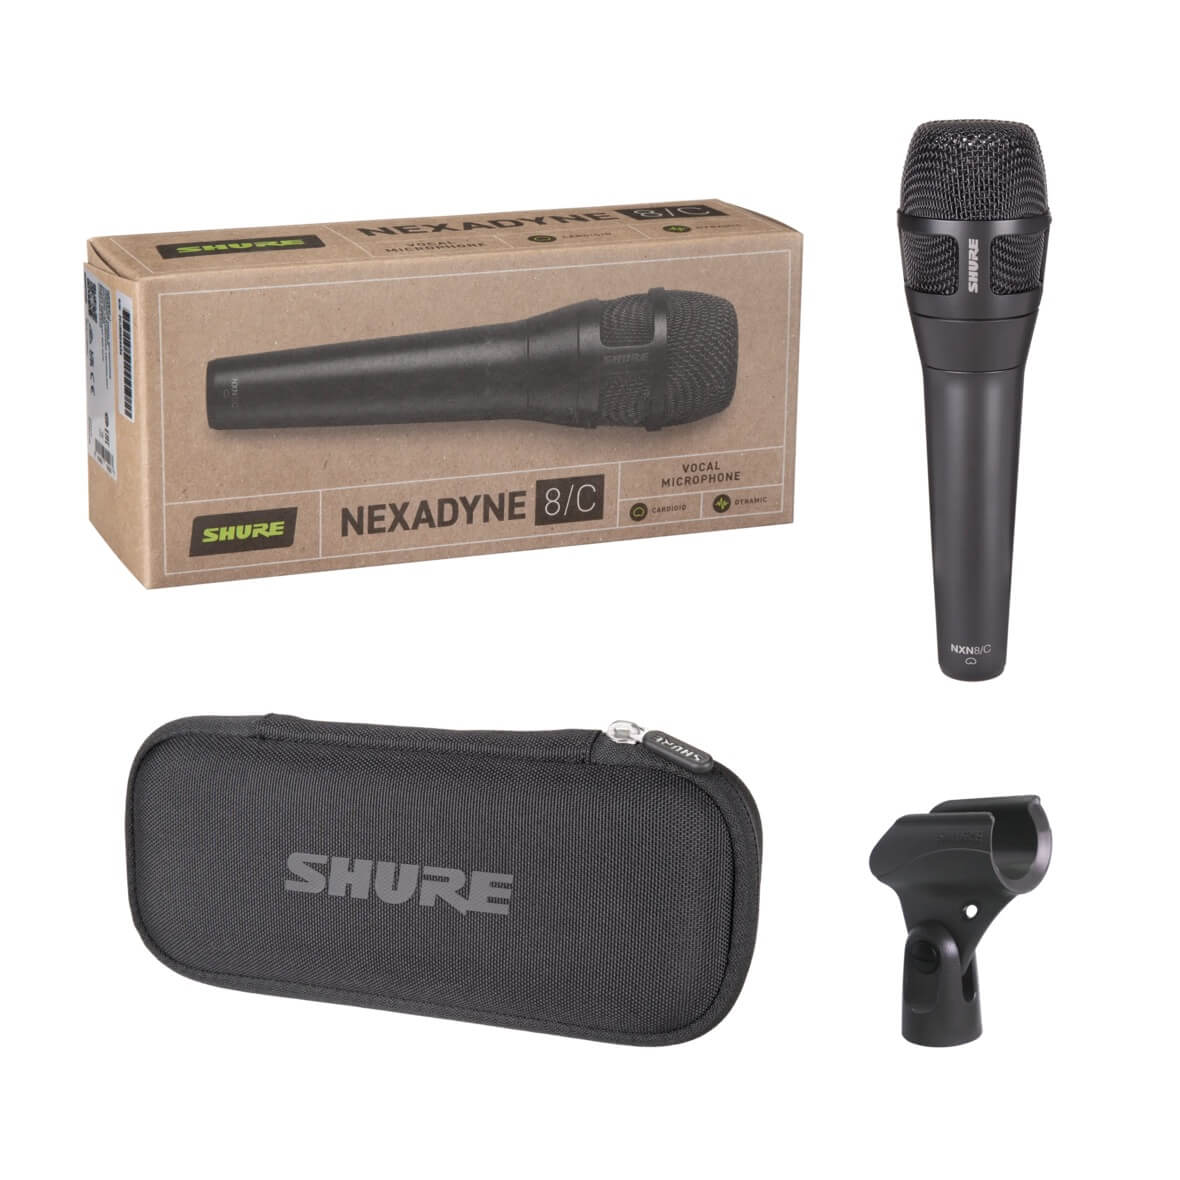 Shure Nexadyne 8/C - Cardioid Dynamic Vocal Microphone, includes case and mic clip